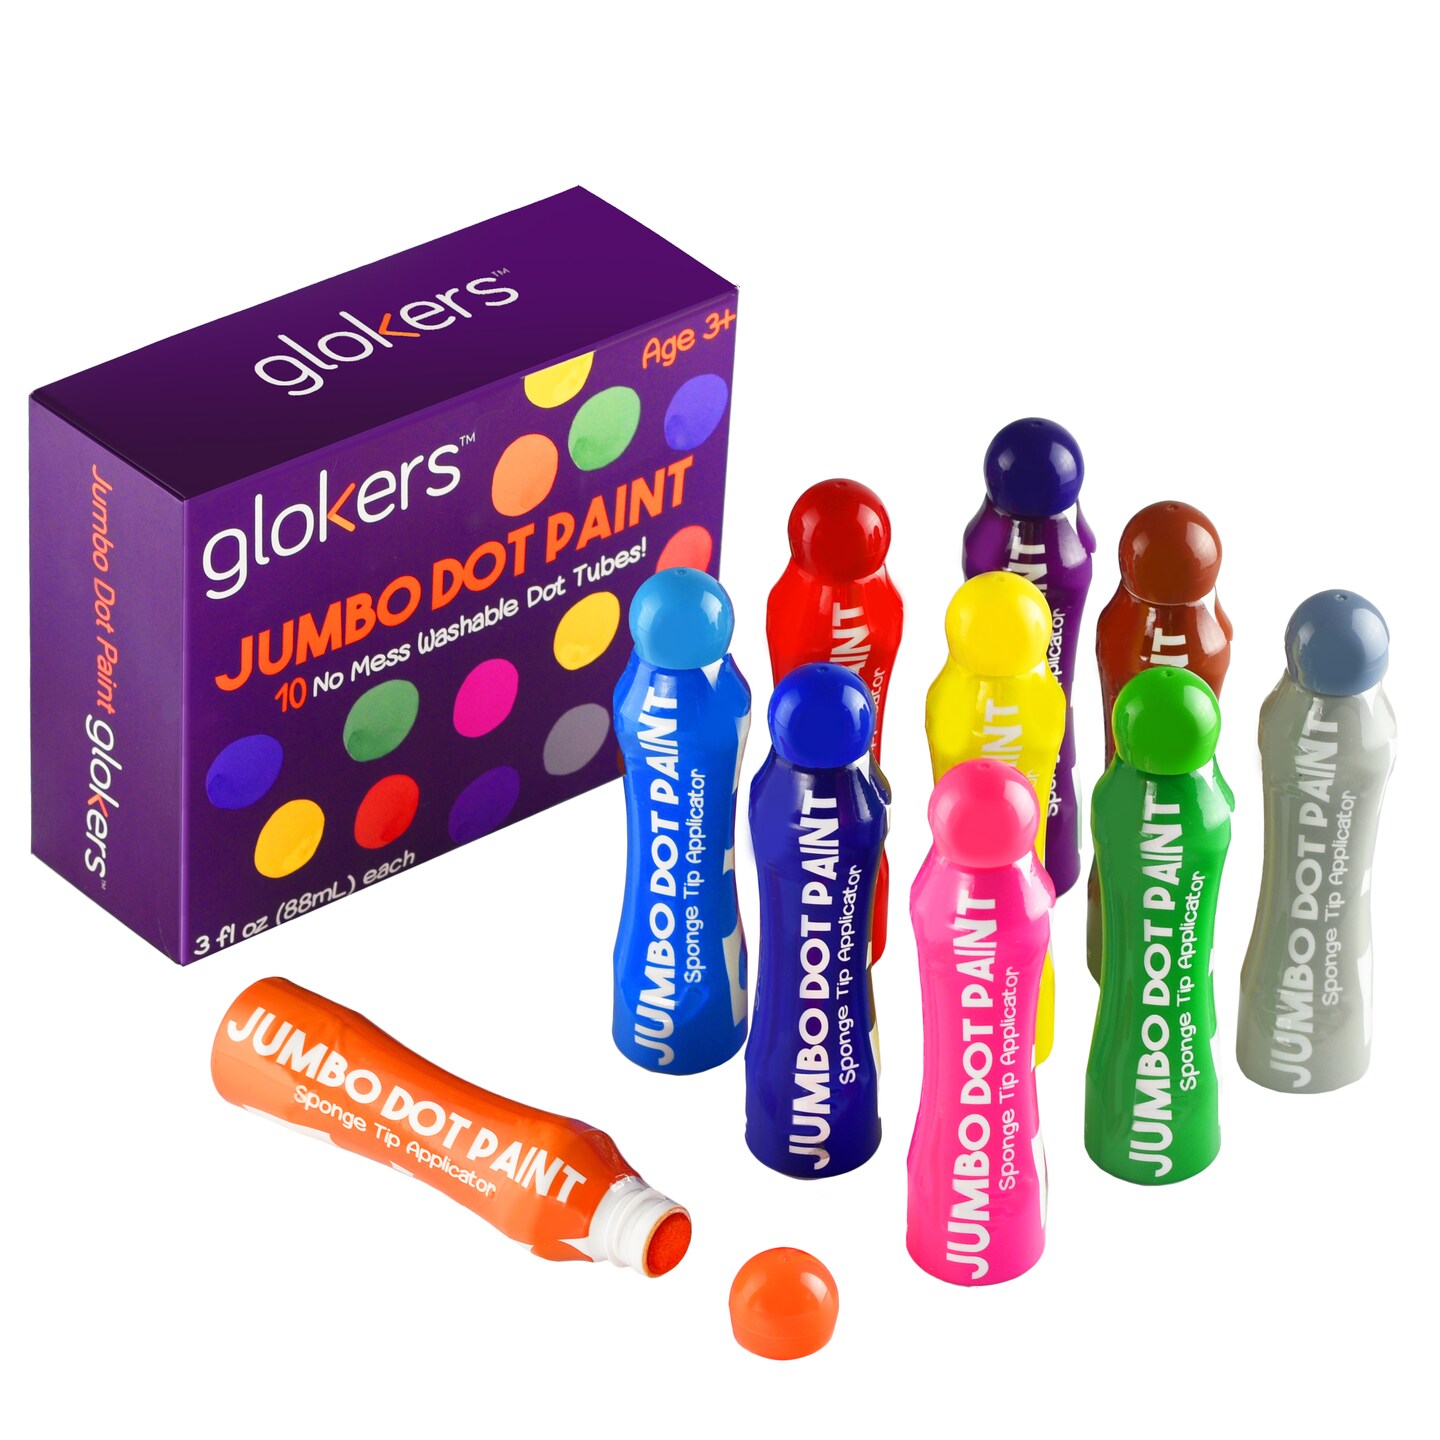 Dot Markers for Kids, Bingo Daubers - Washable - 10 Color Pack, by